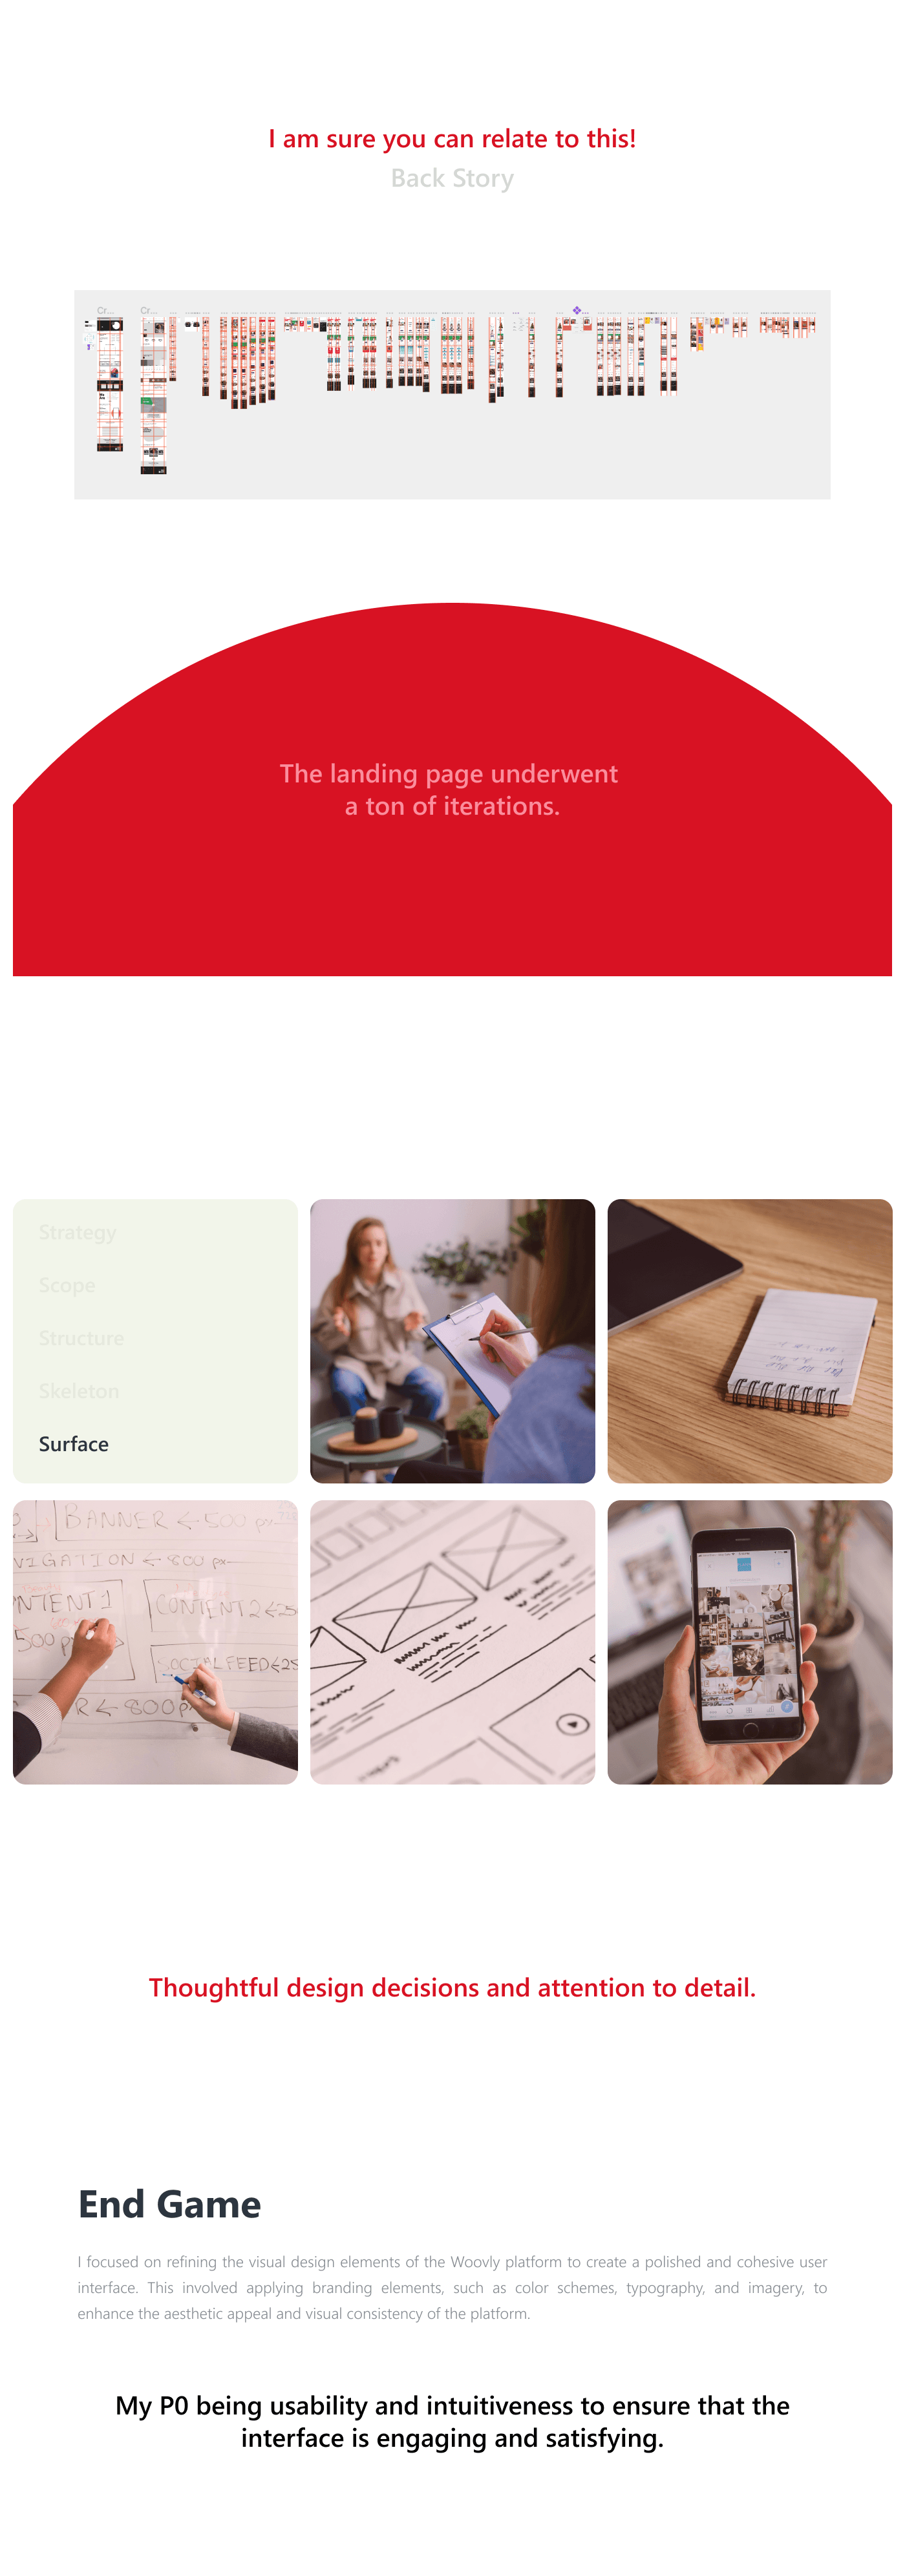 ux UI/UX landing page Figma Mobile app INFLUENCER mobile user interface Experience design